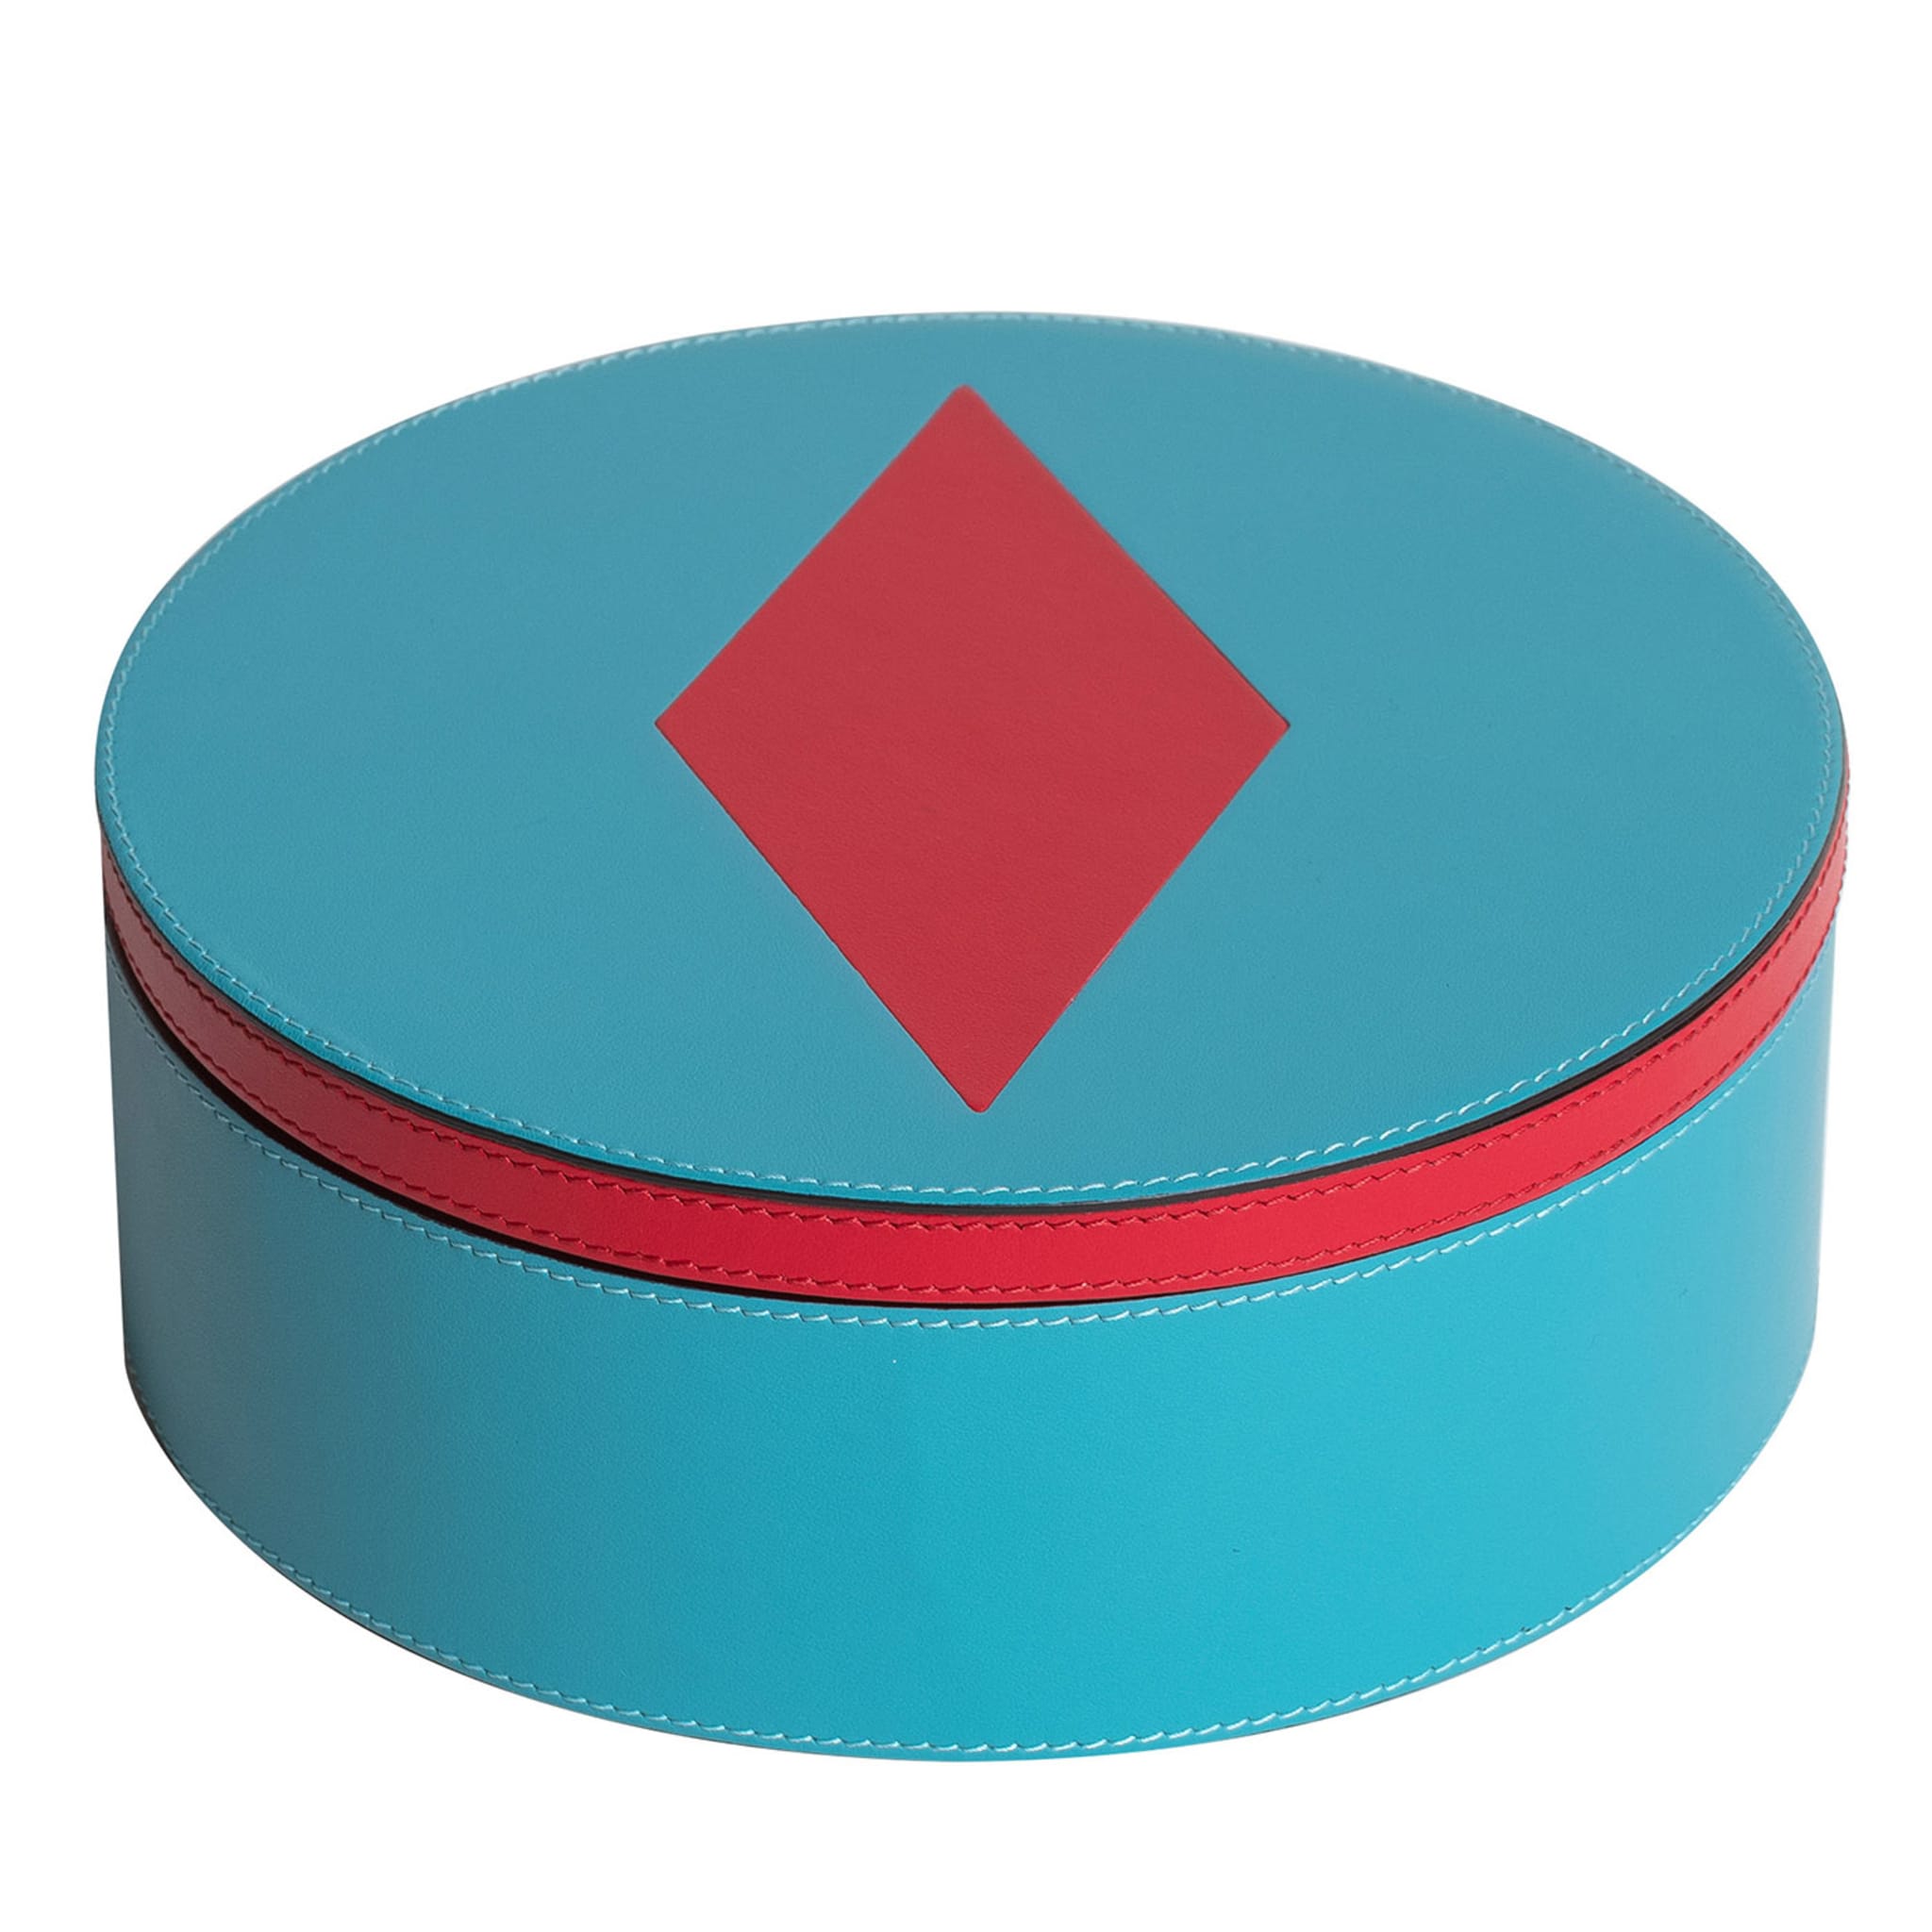 Intarsio Briolette Turquoise and True Red Circle Box - Main view